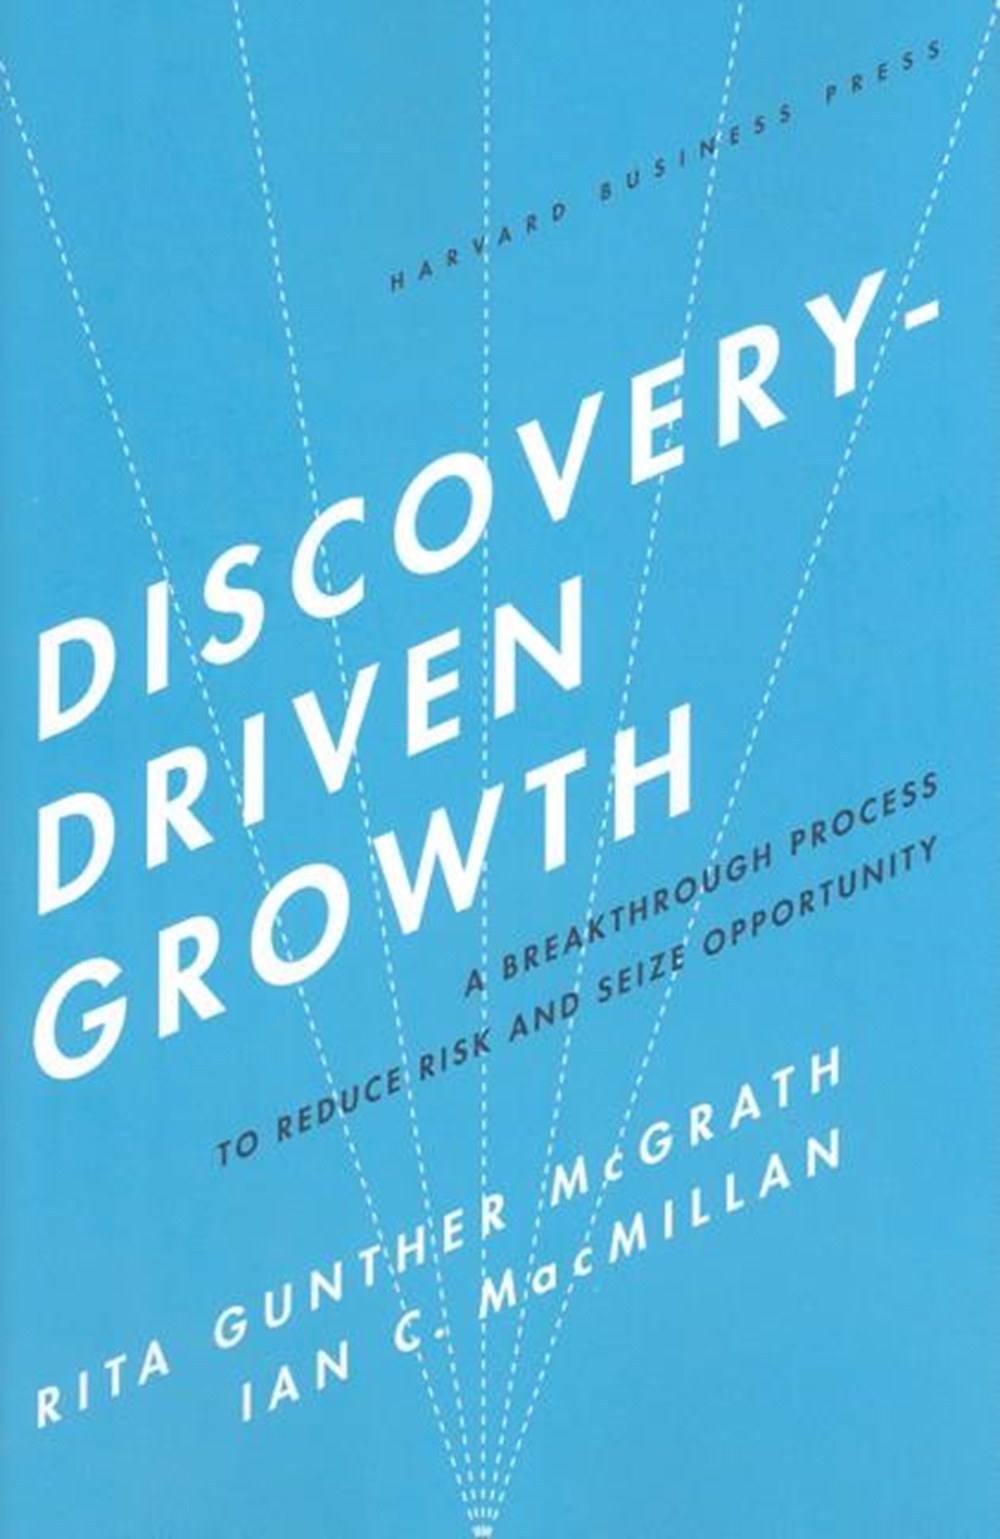 Discovery-Driven Growth A Breakthrough Process to Reduce Risk and Seize Opportunity